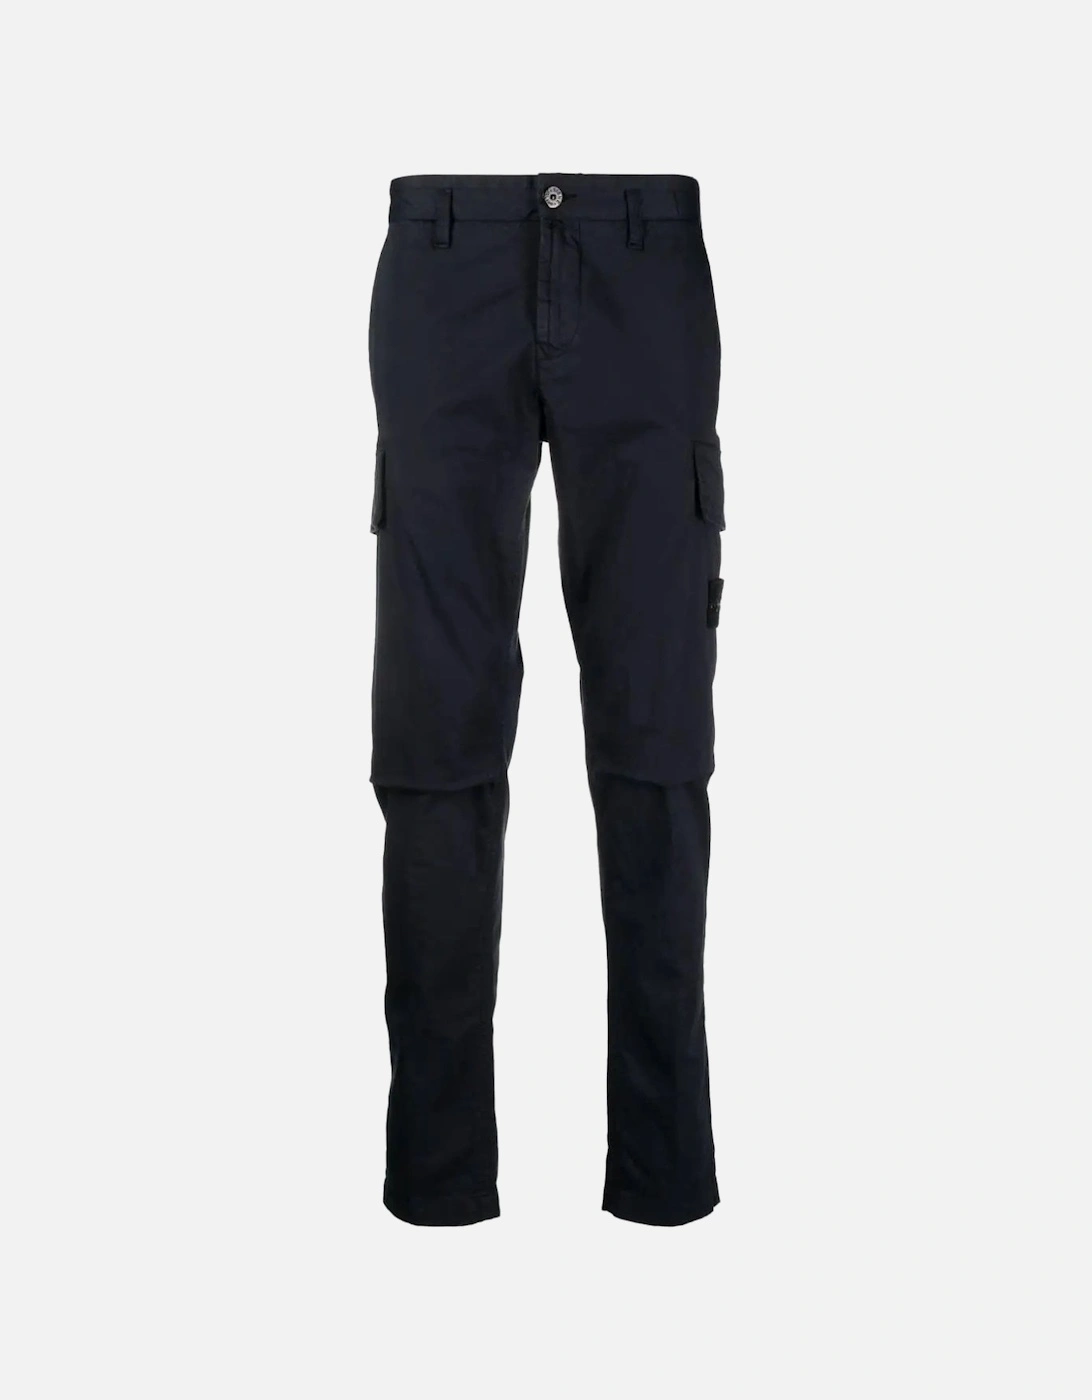 Cotton Combat Trousers Navy, 9 of 8